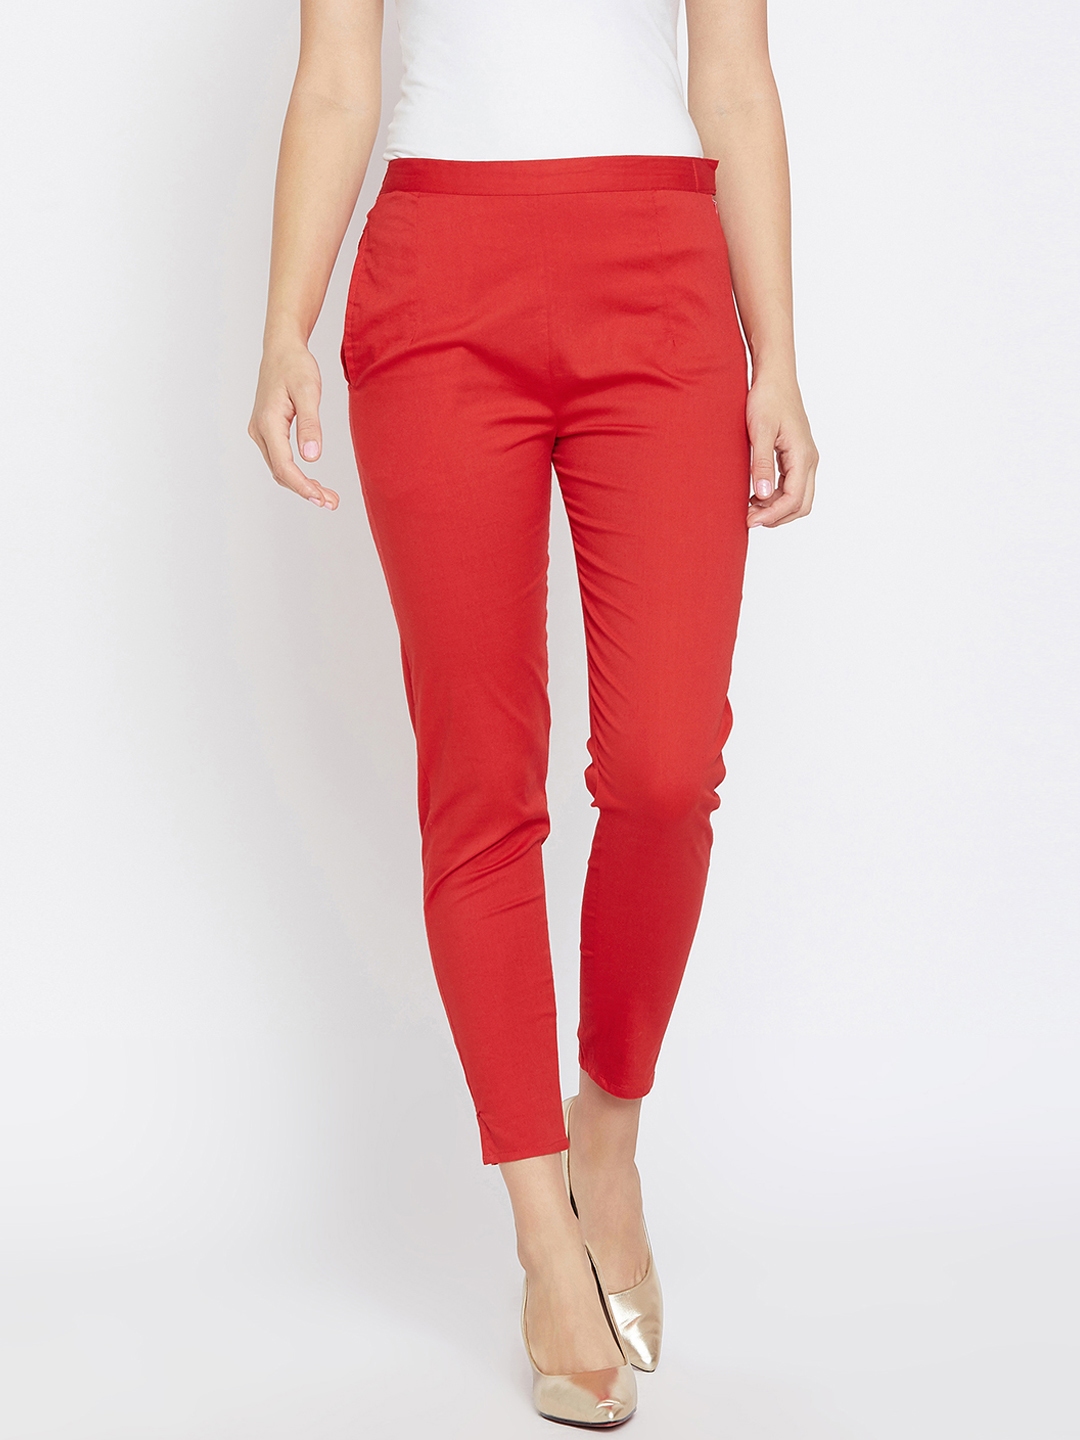 Buy Dollar Missy Parry Red Regular Fit Cigarette Trousers for Women Online   Tata CLiQ